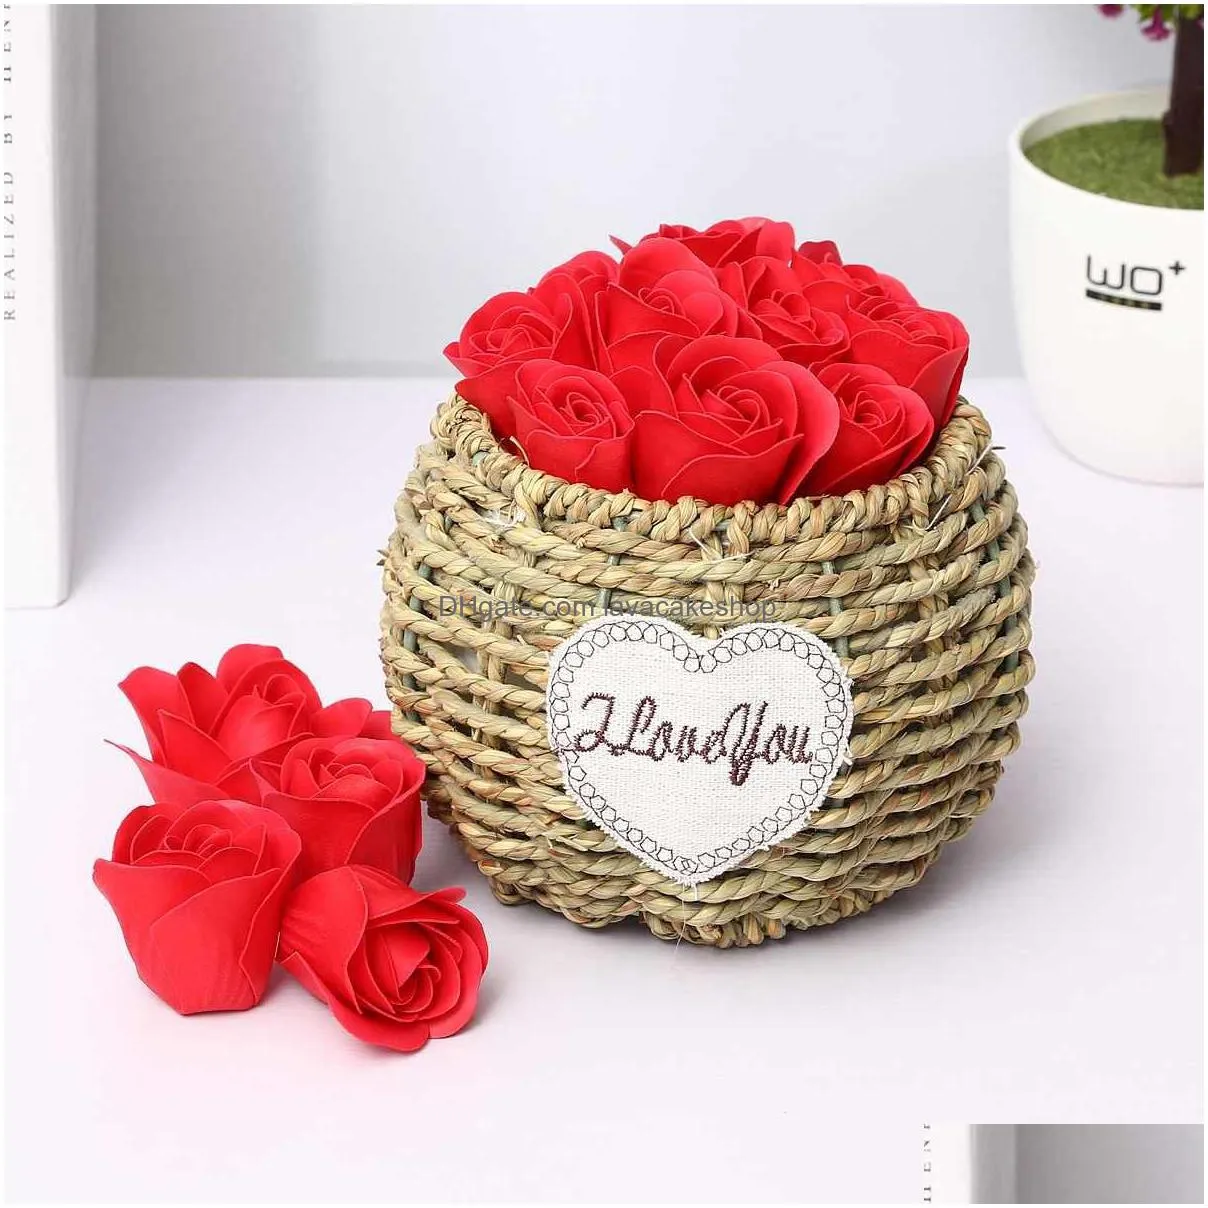 81 pcs soap roses artificial dried flowers heads rose bouquet for rose petals bath party wedding decoration valentines day gift f1217